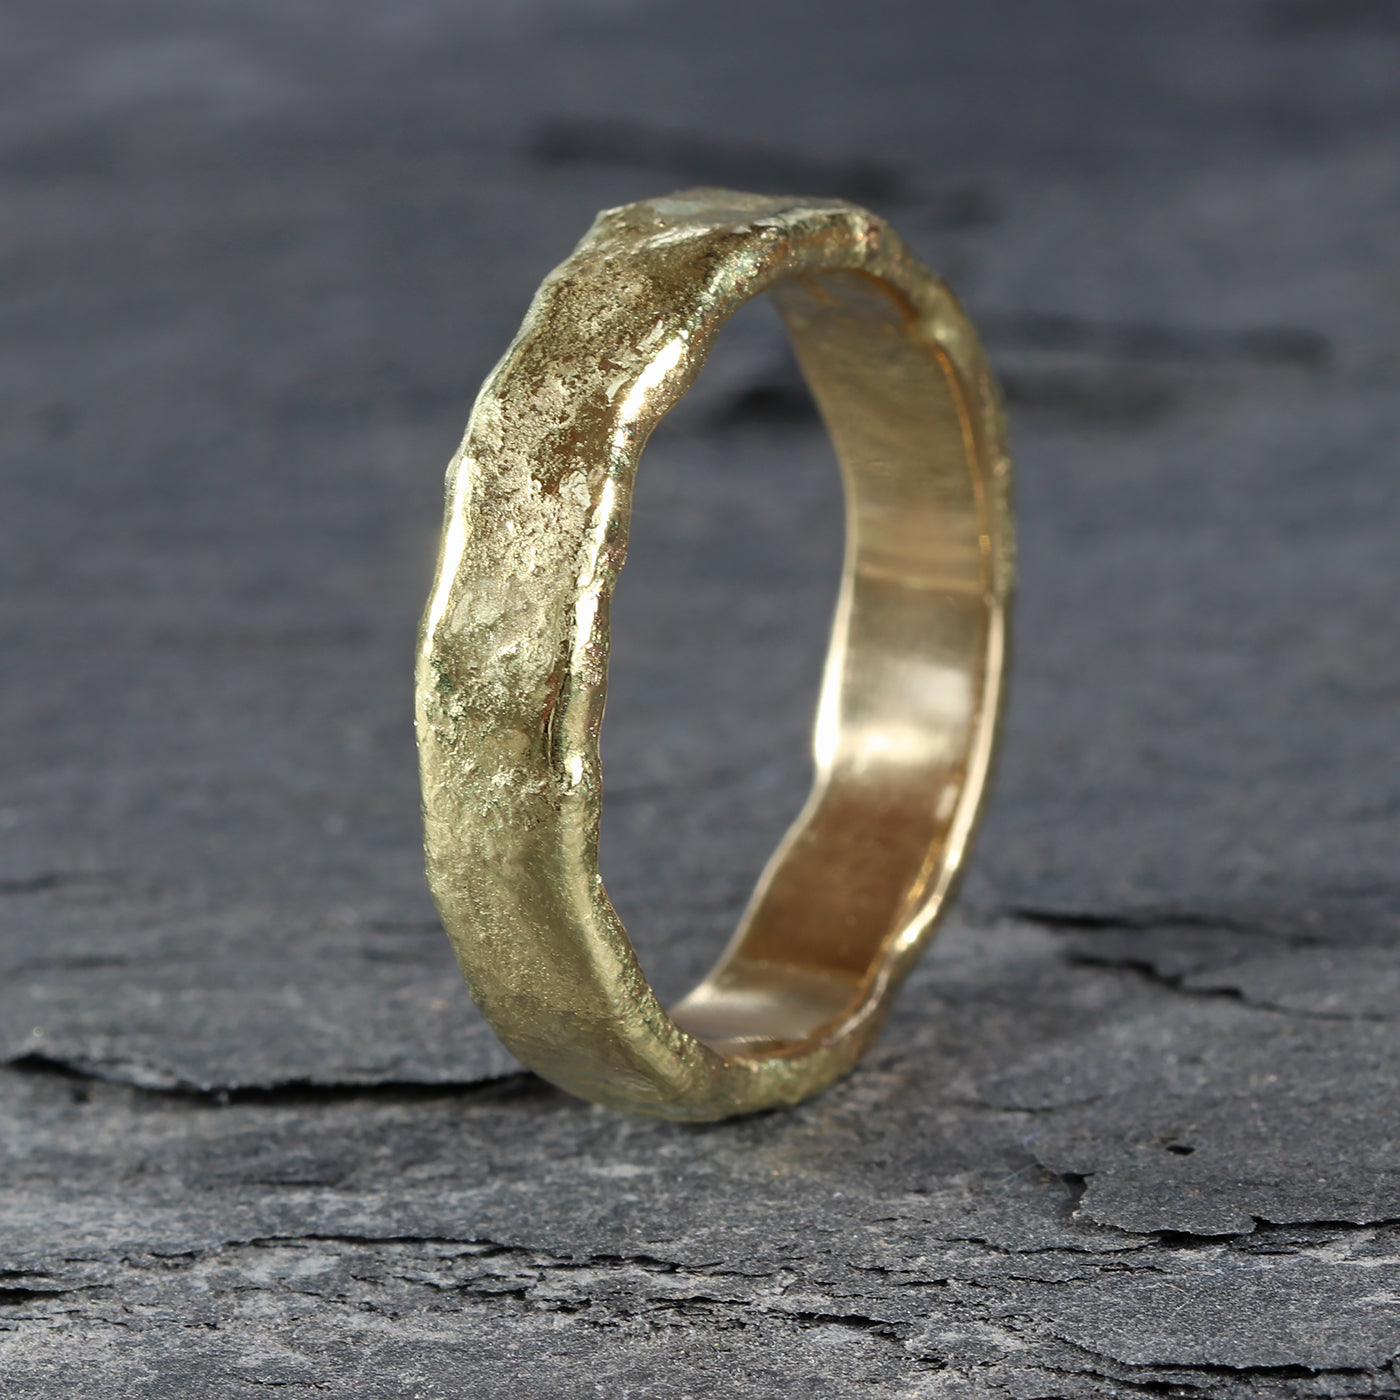 5mm Mineral Wedding Ring in 18ct Gold – Size T (resize G to T 1/2)